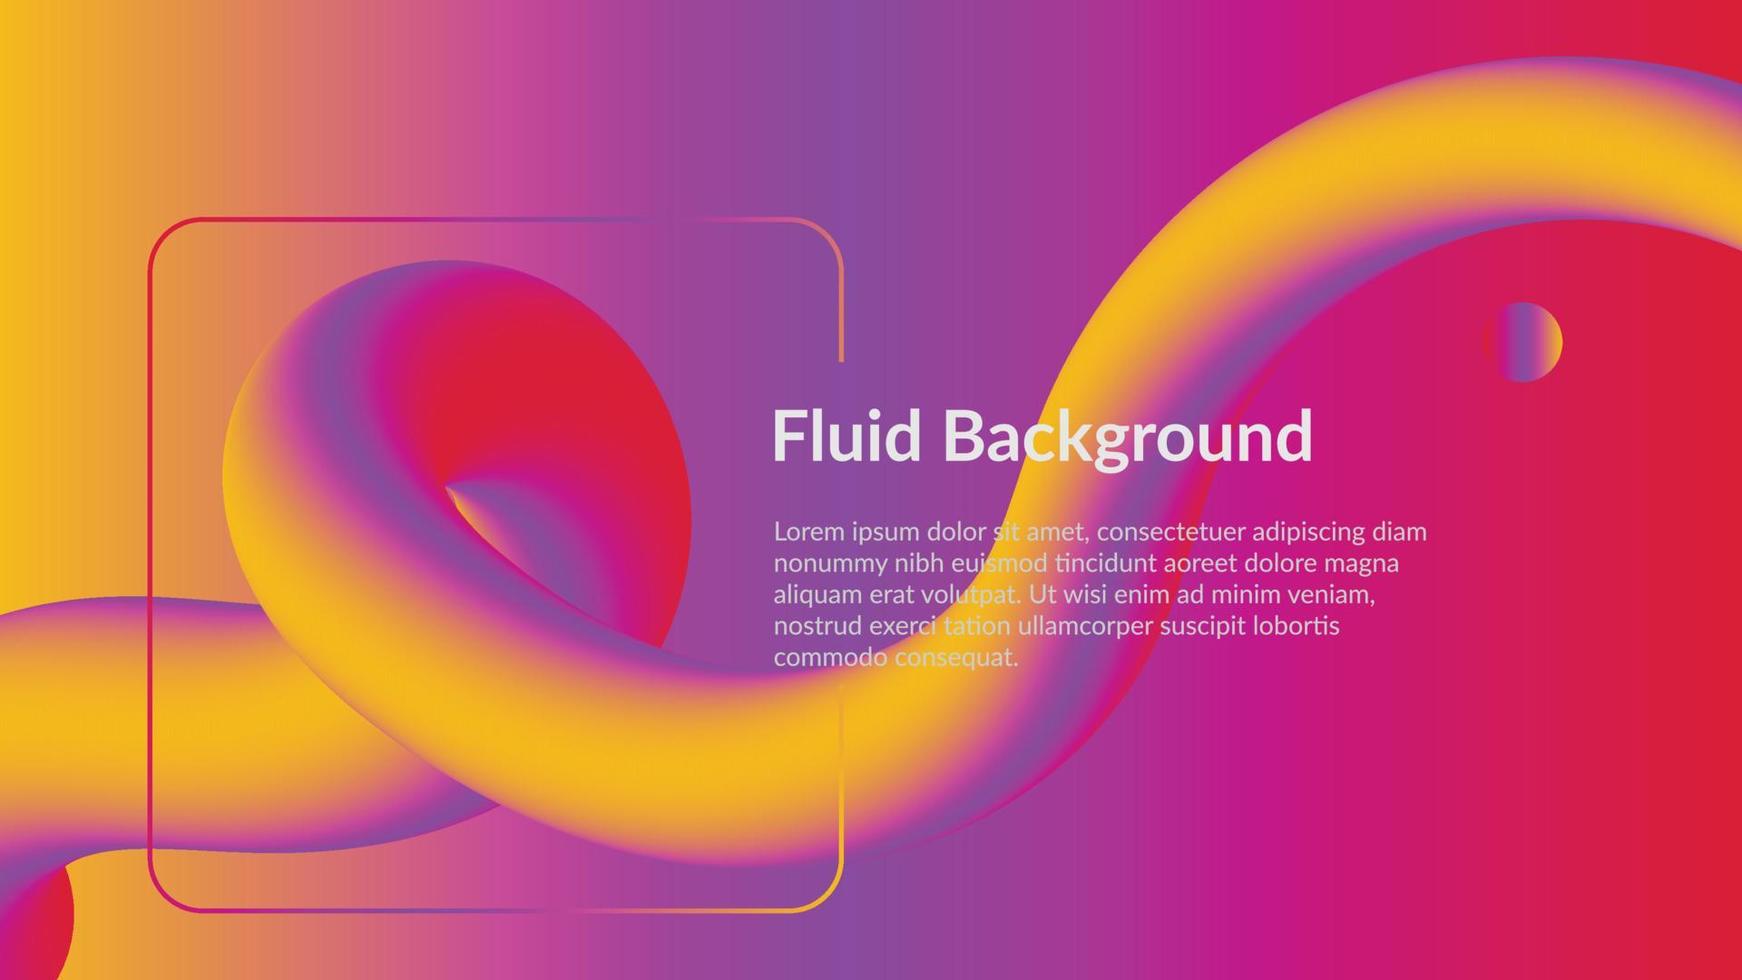 Fluid background vector illustration with liquid shapes. Abstract Shape gradient backgrounds. 3d colorful dynamic fluid background. Applicable for covers, websites, flyers, presentations, banners